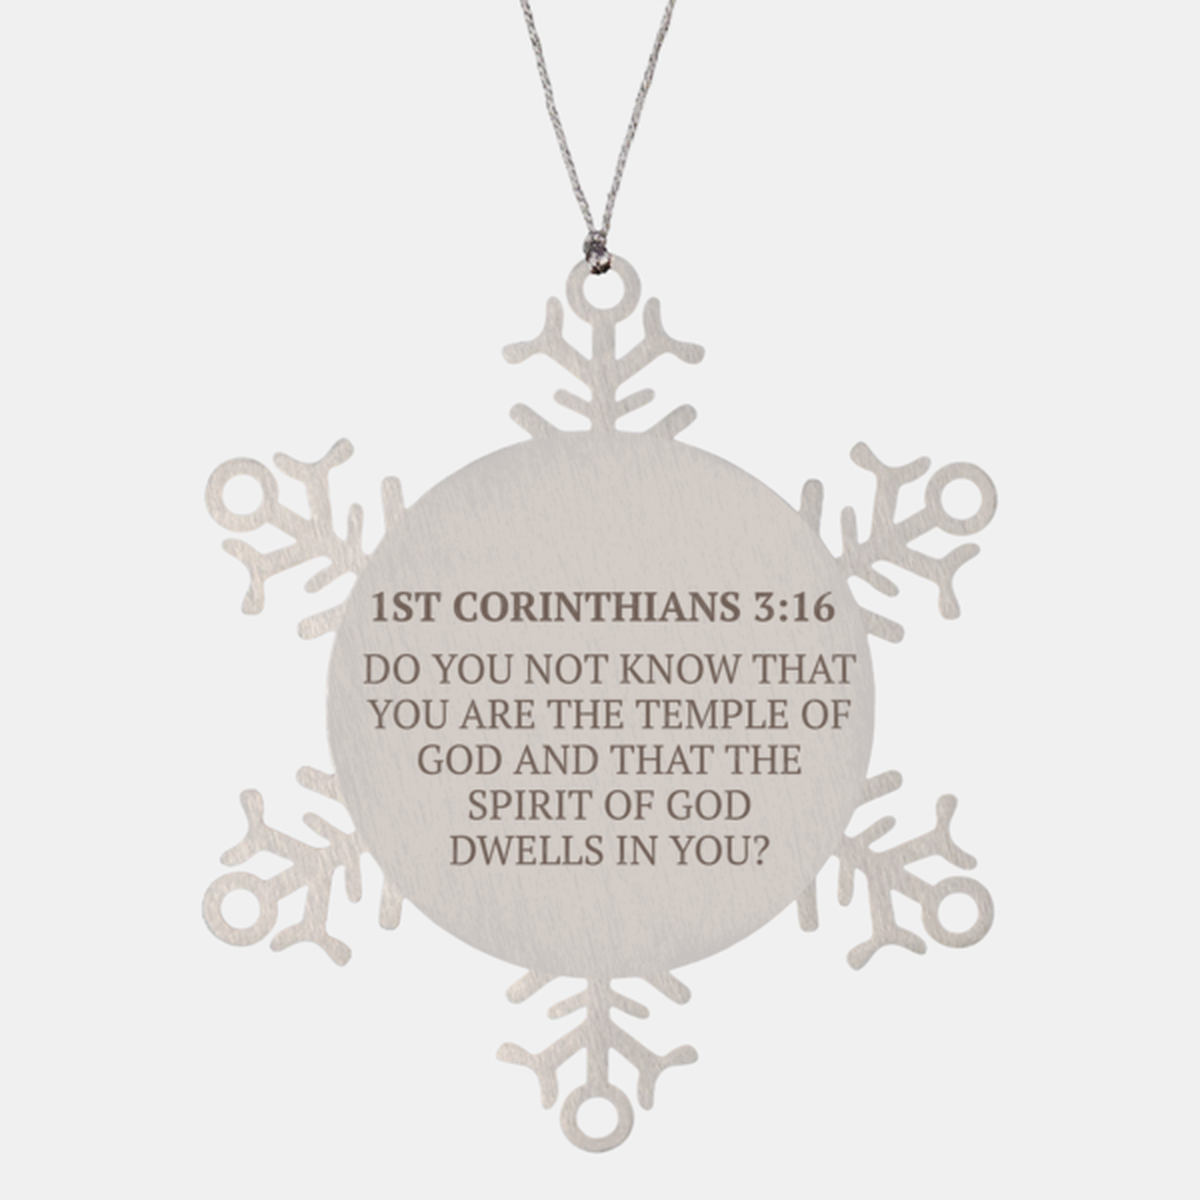 Christian Ornaments For Christmas Tree, Do You Not Know That You Are The Temple Of God, Religious Christmas Decorations, Scripture Ornaments Gifts, Bible Verse Ornament